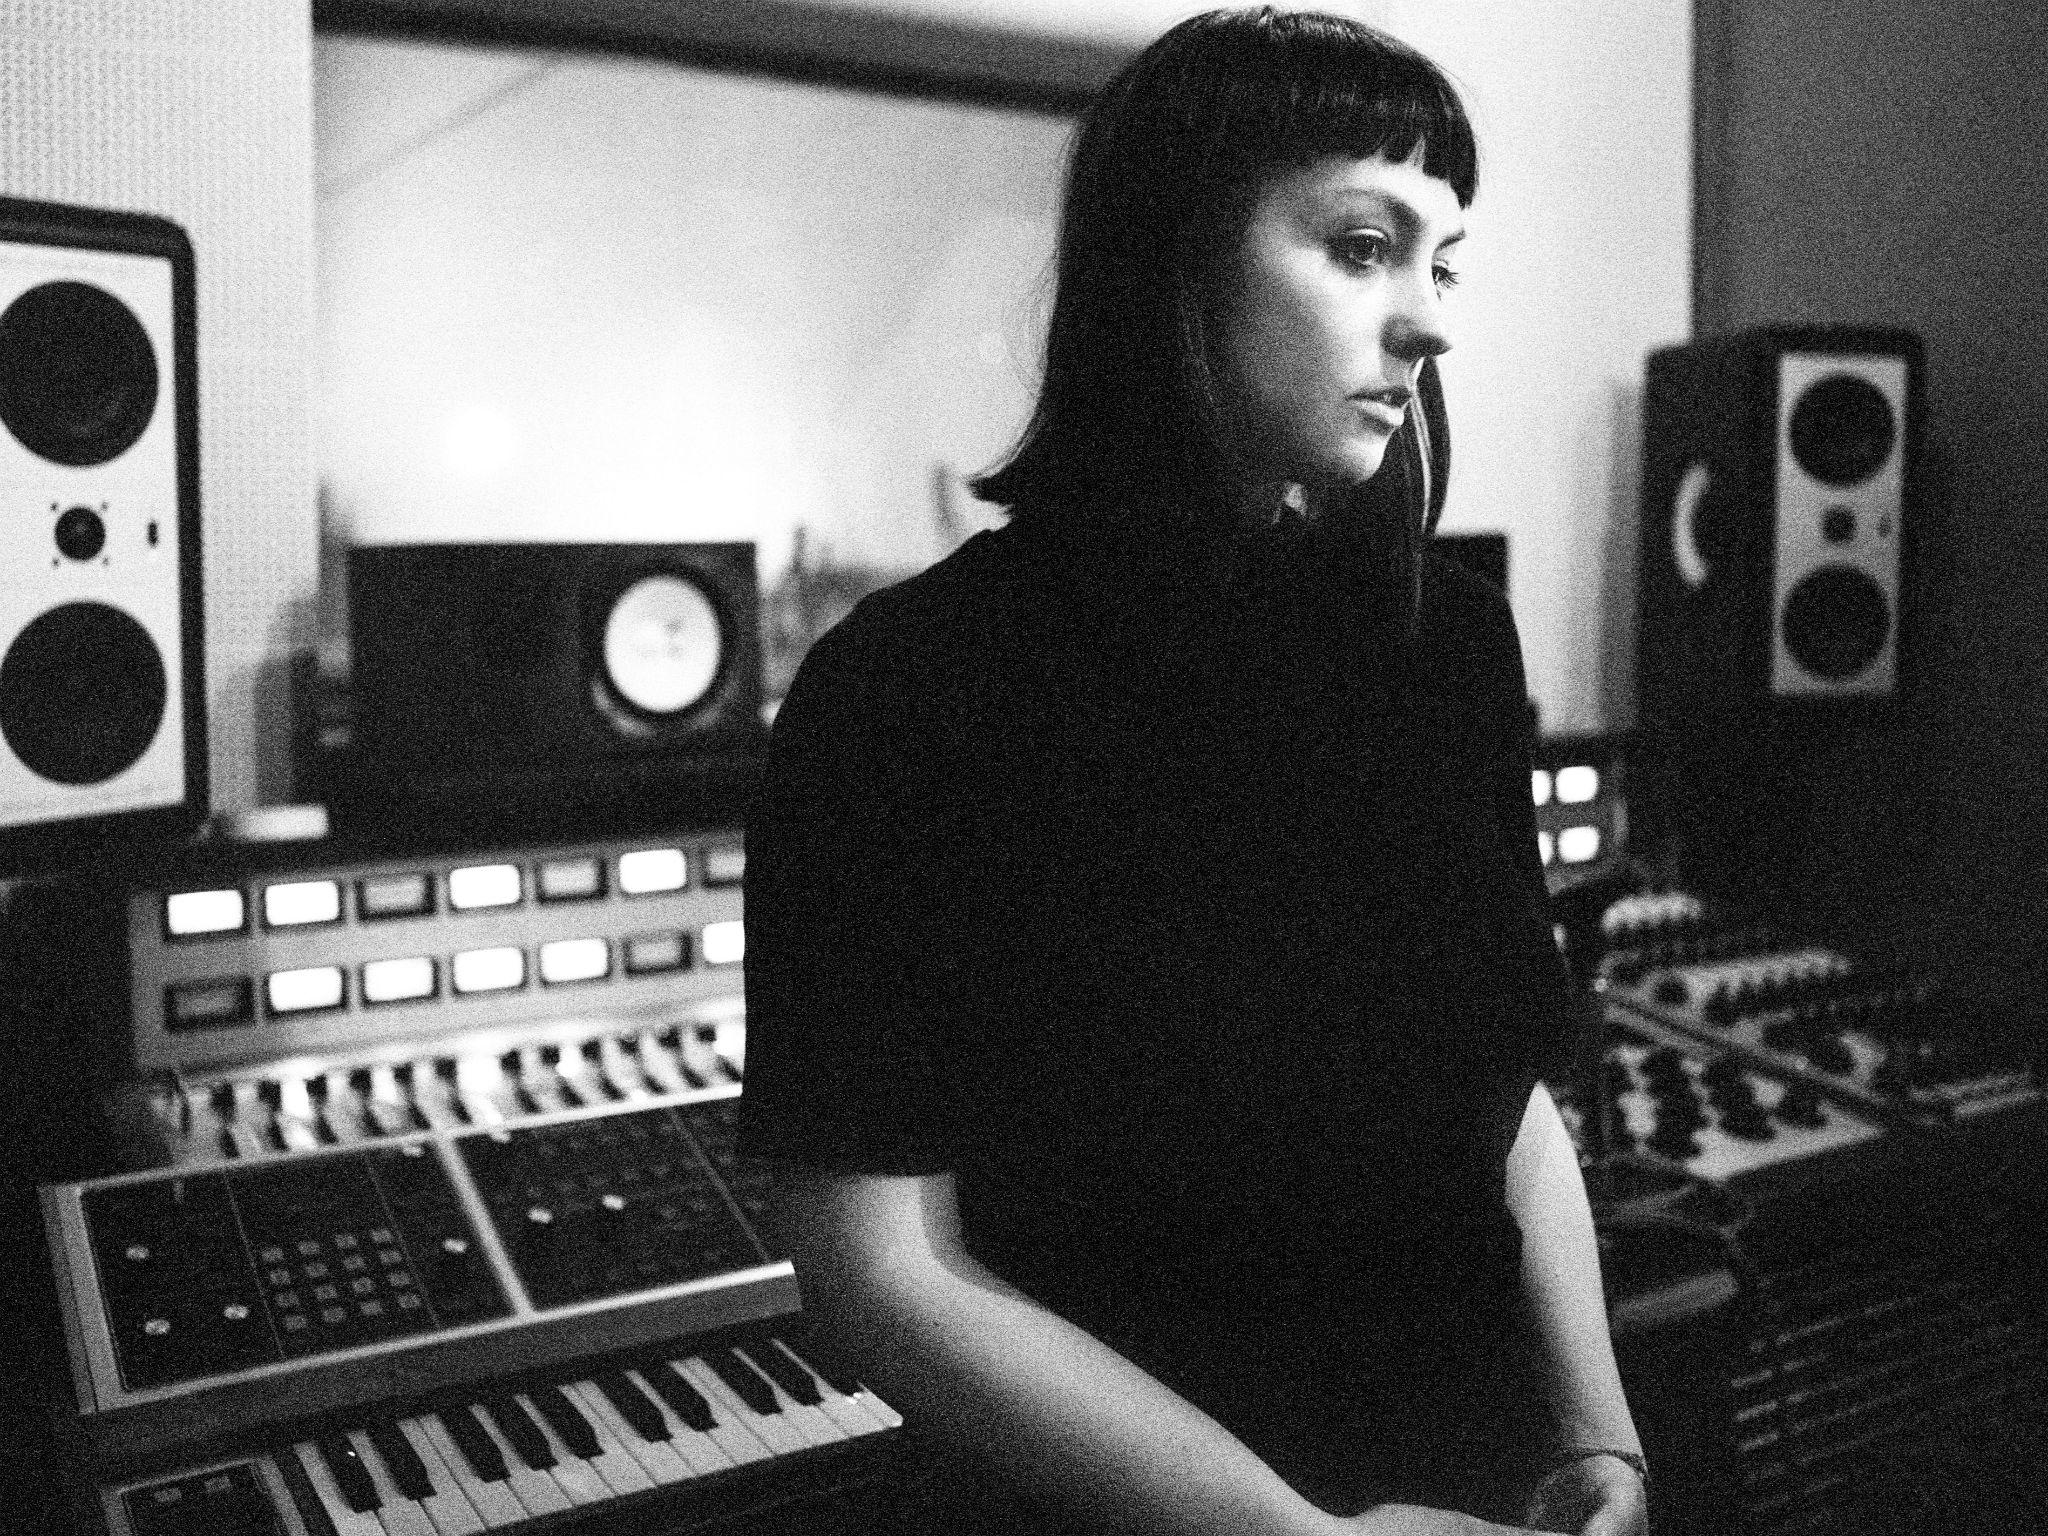 &#13;
Angel Olsen wanted the title for her new album, ‘My Woman’, to be strong &#13;